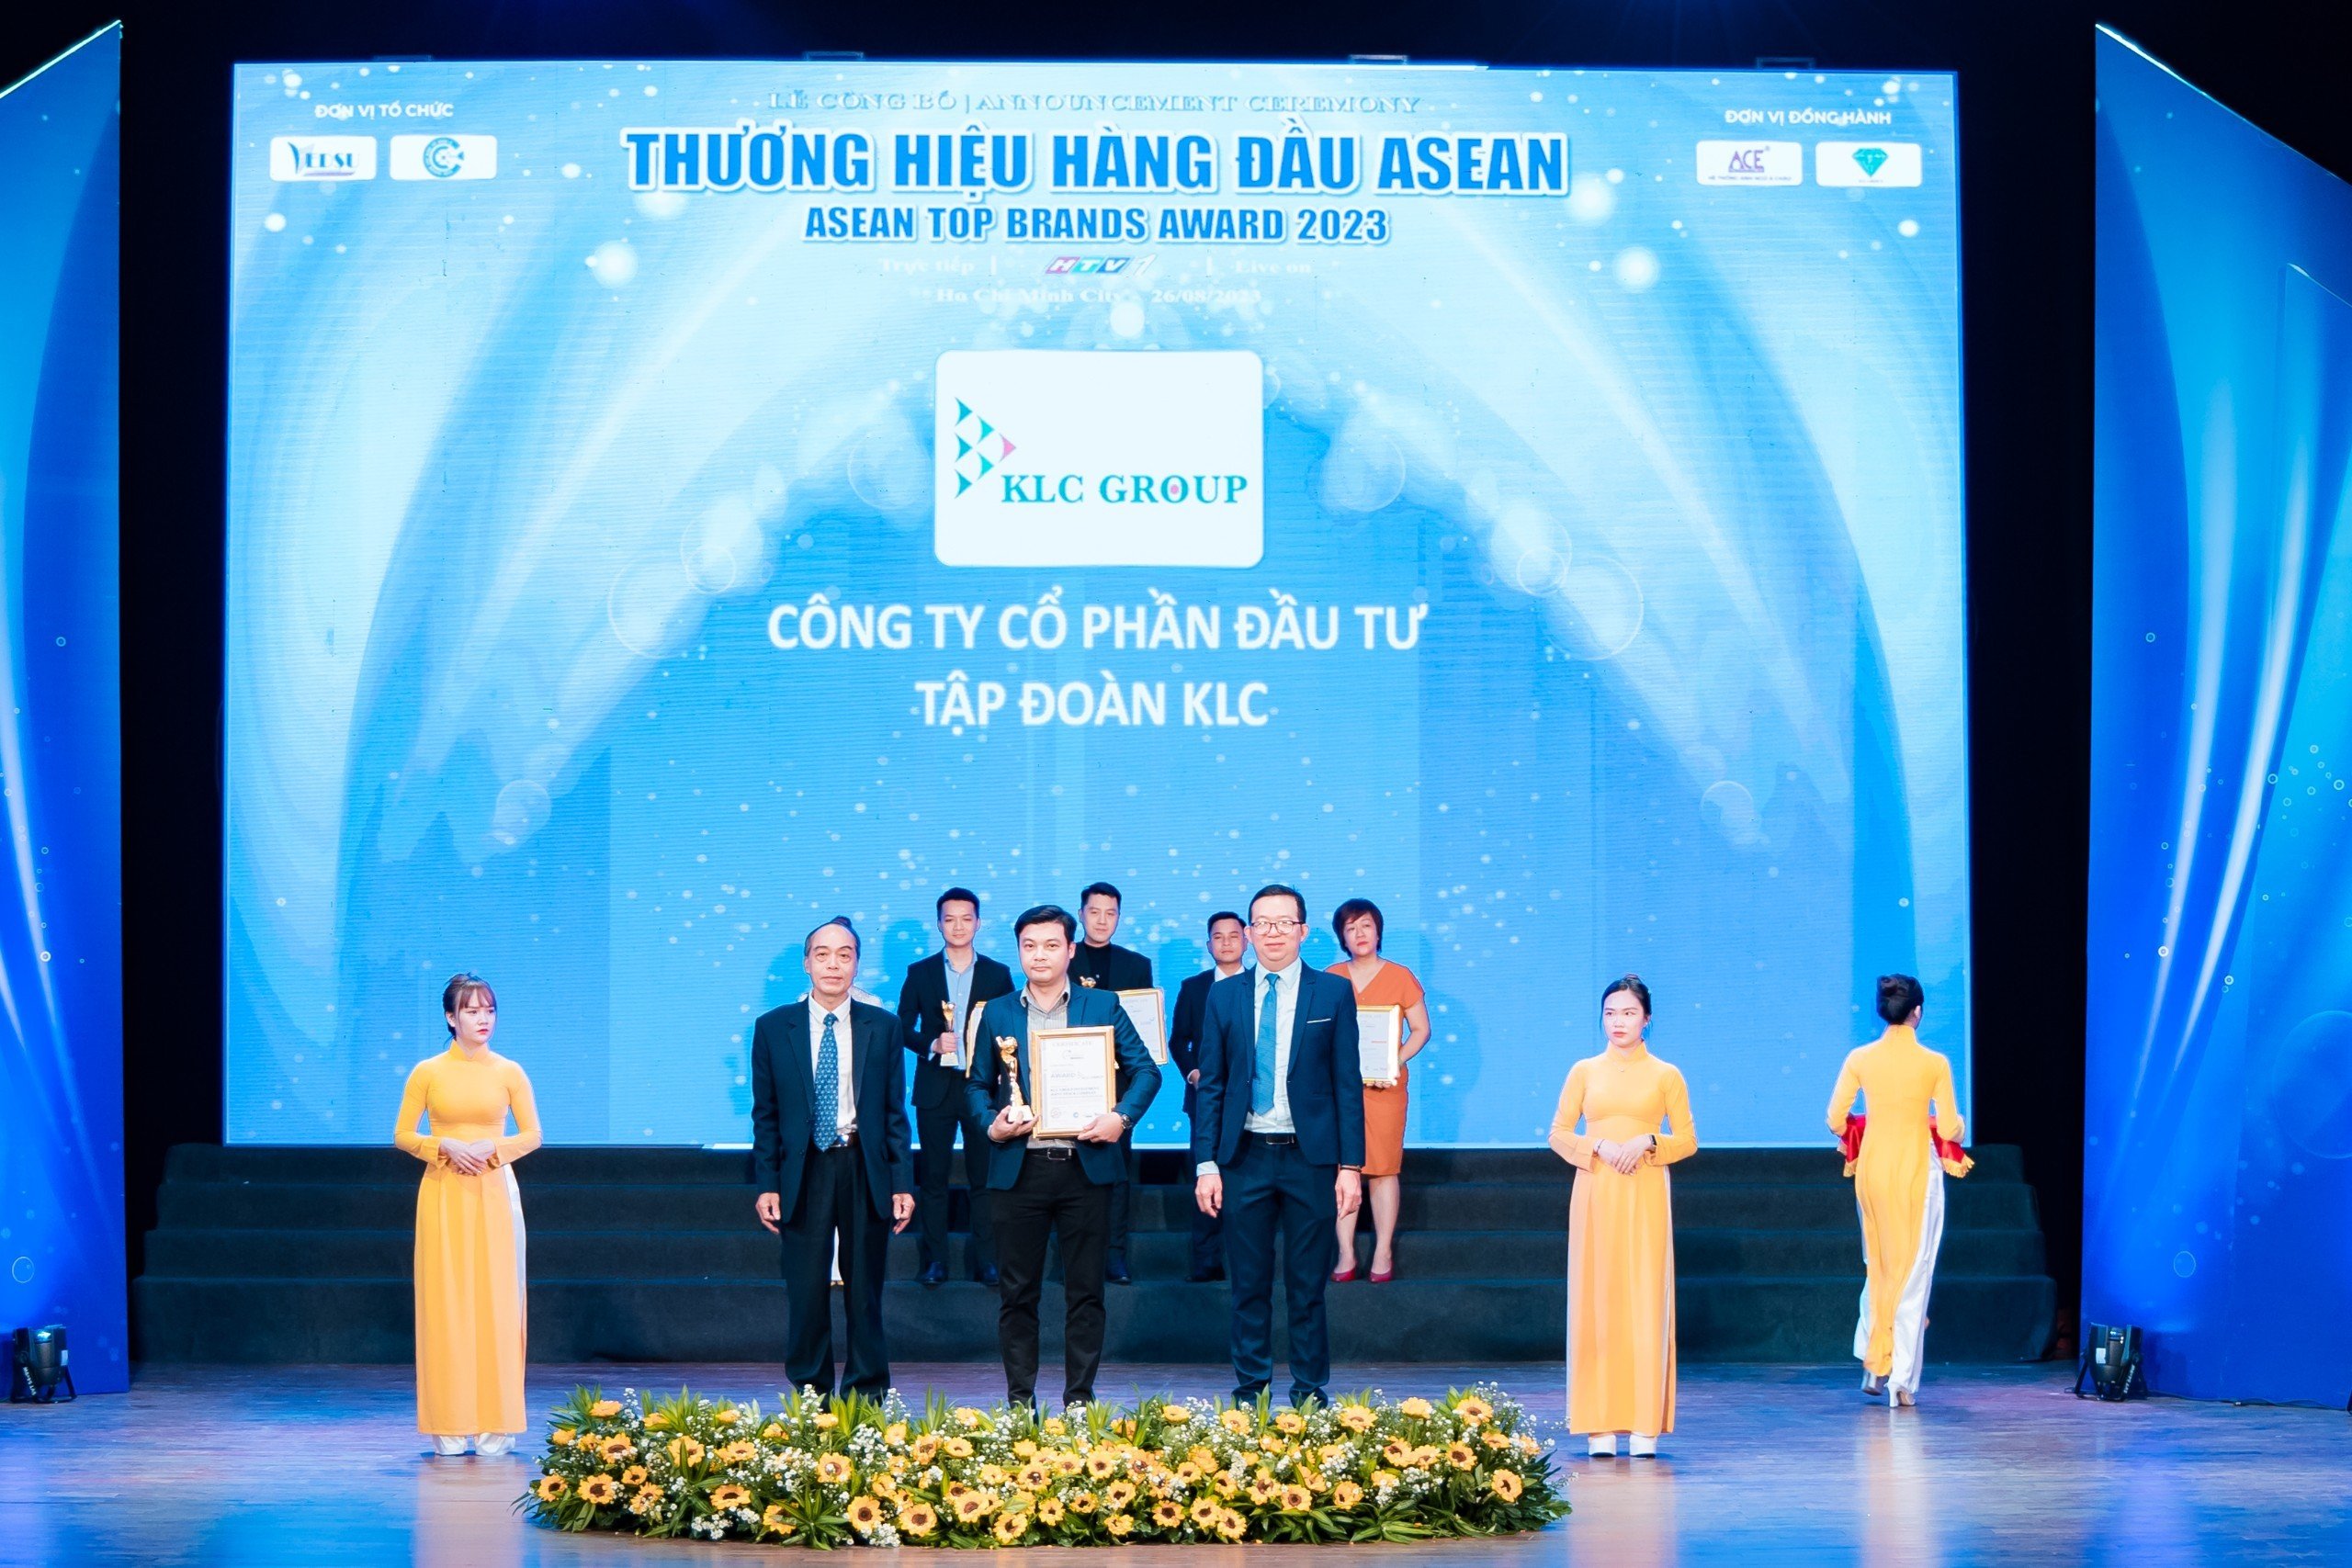 KLC Group has received two prestigious awards: "Top Brand" and "Best Working Environment" - ASEAN Top Brands Award 2023.